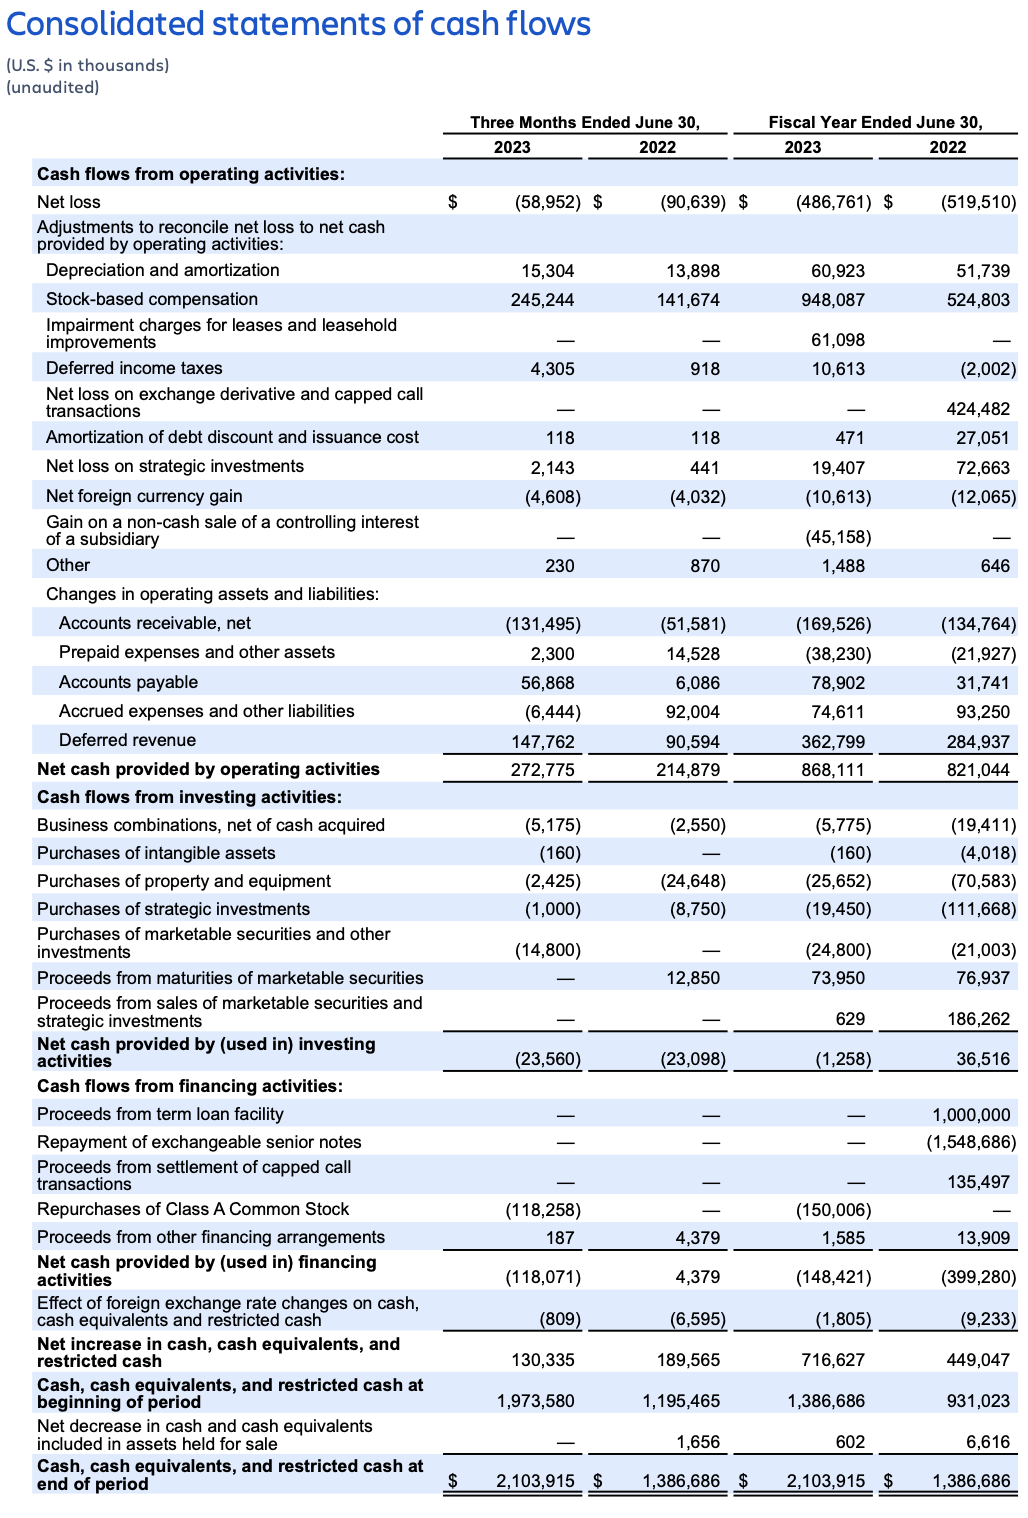 Atlassian earnings Q4FY23 – consolidated statement of cash flows